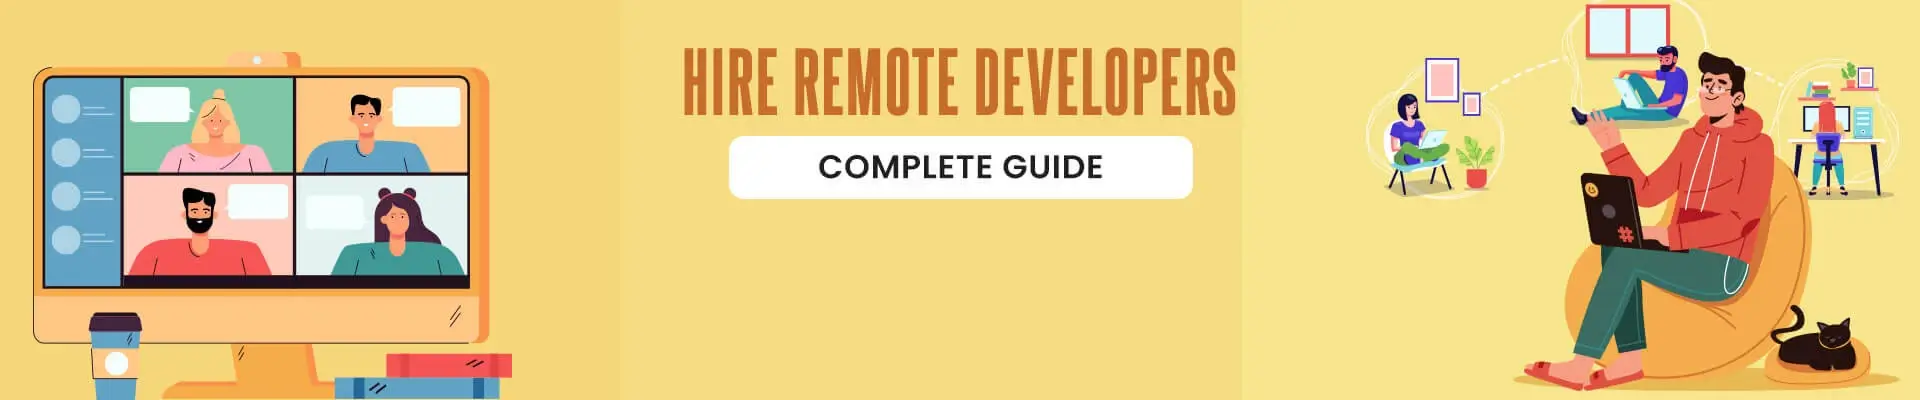 Hire Remote Developers (Complete Guide on Hiring Remote Developers that 100% Help You)